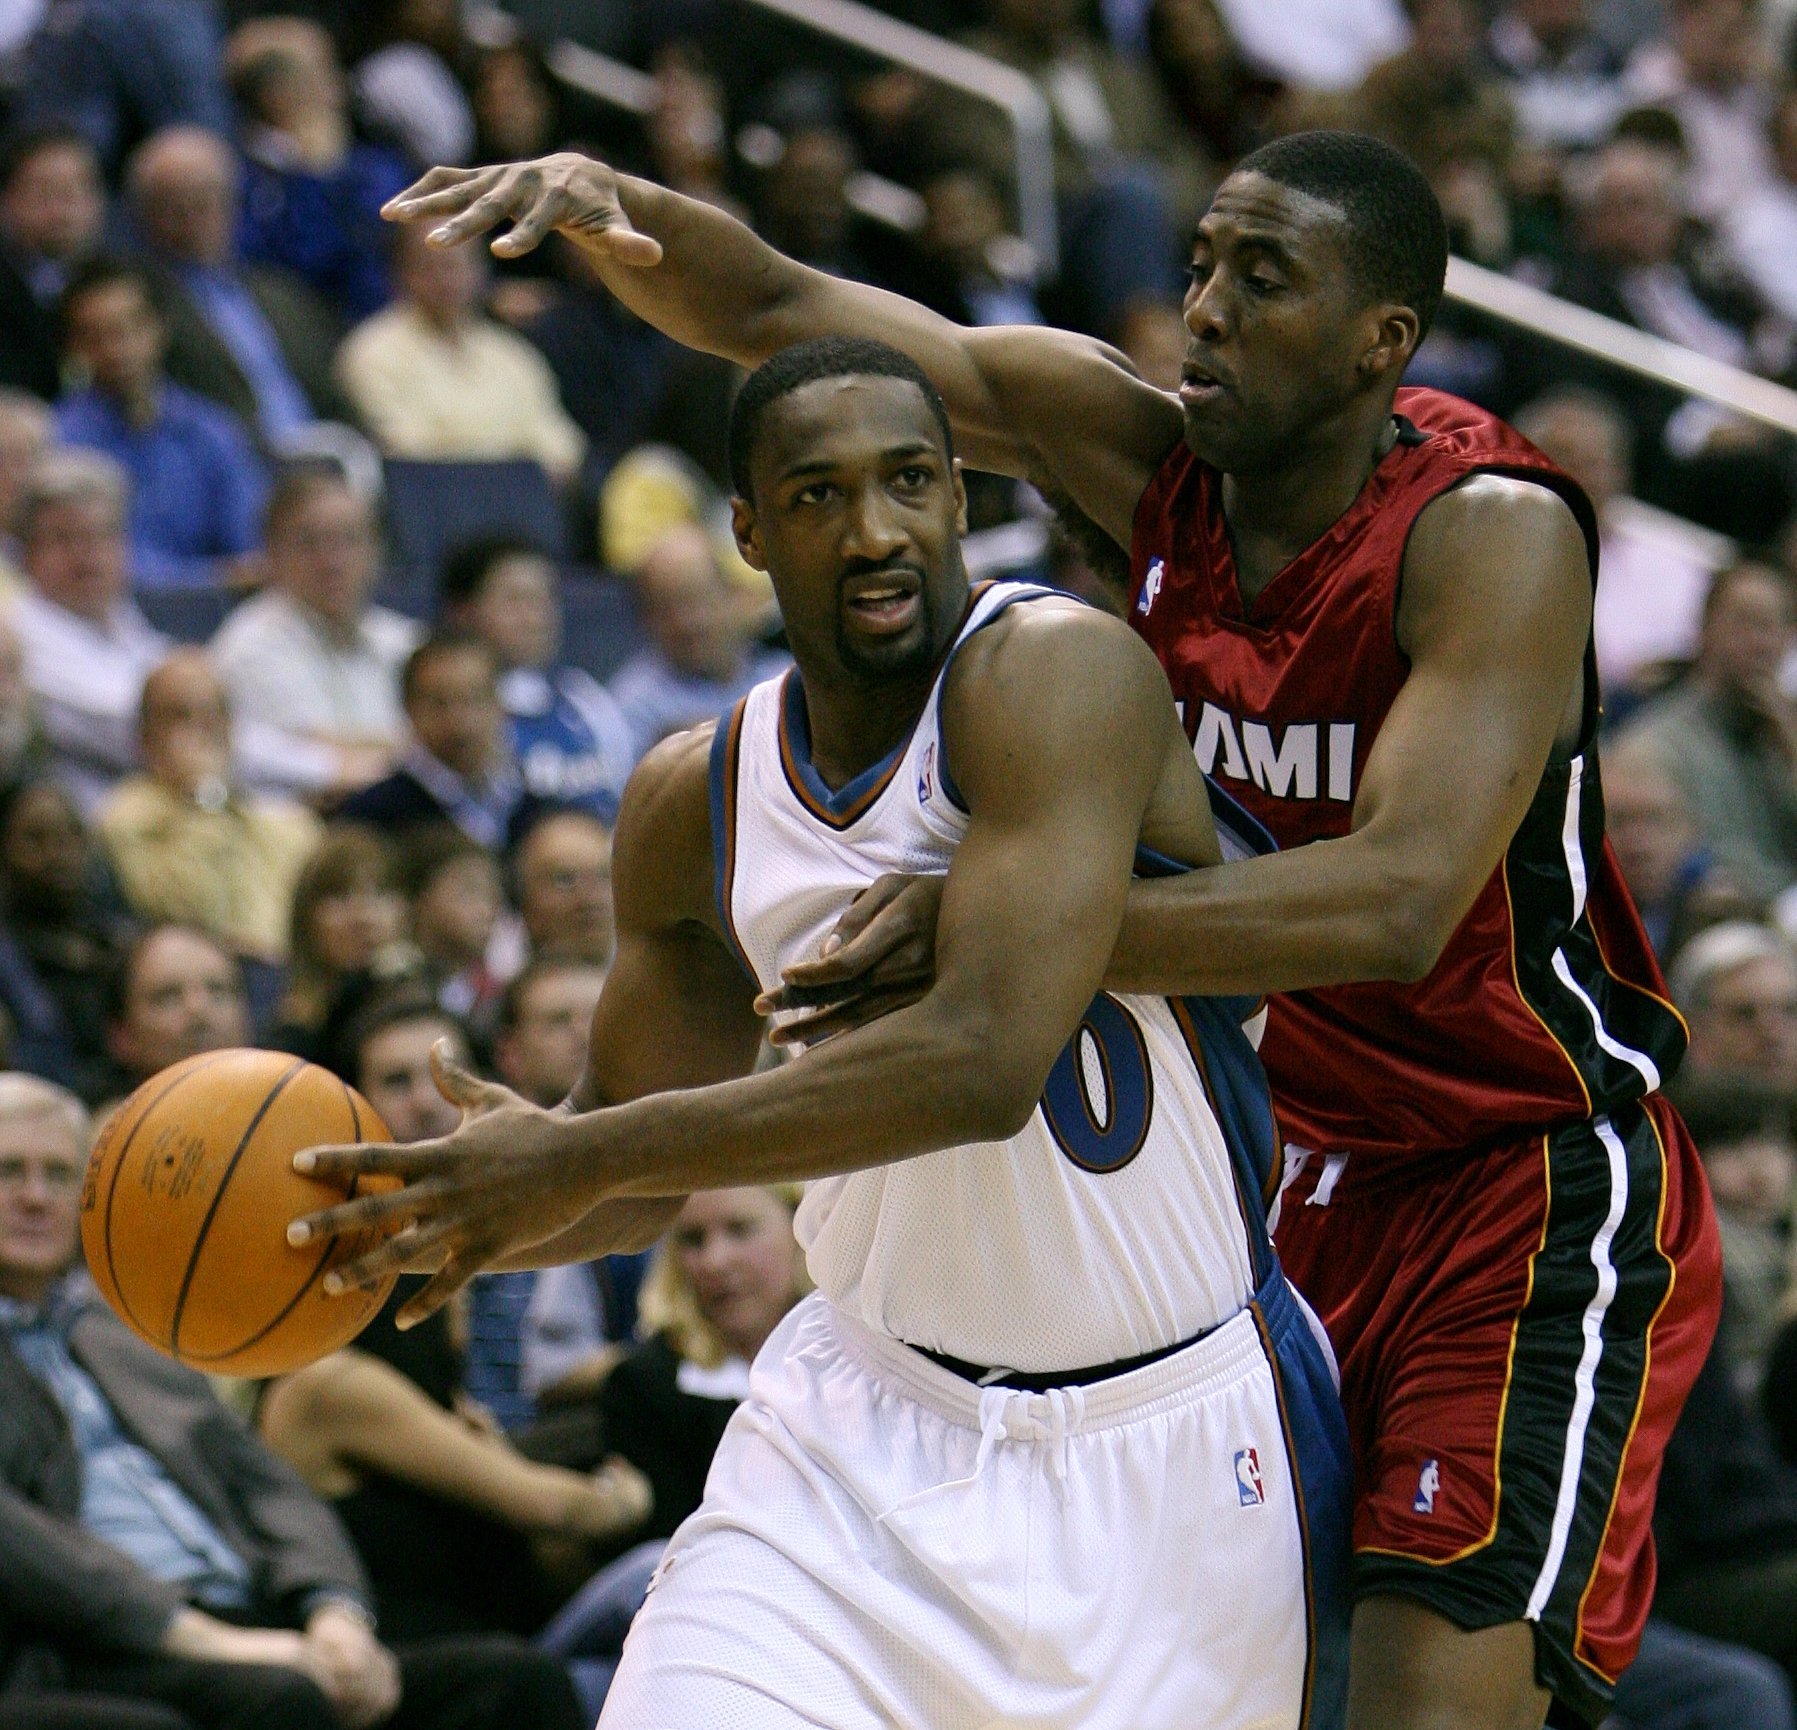 Gilbert Arenas of the Washington Wizards NBA team drives with the basketball while Eddie Jones of the Miami Heat defends, February 2007 | Photo By Keith Allison, CC BY-SA 2.0, Wikimedia Commons Images